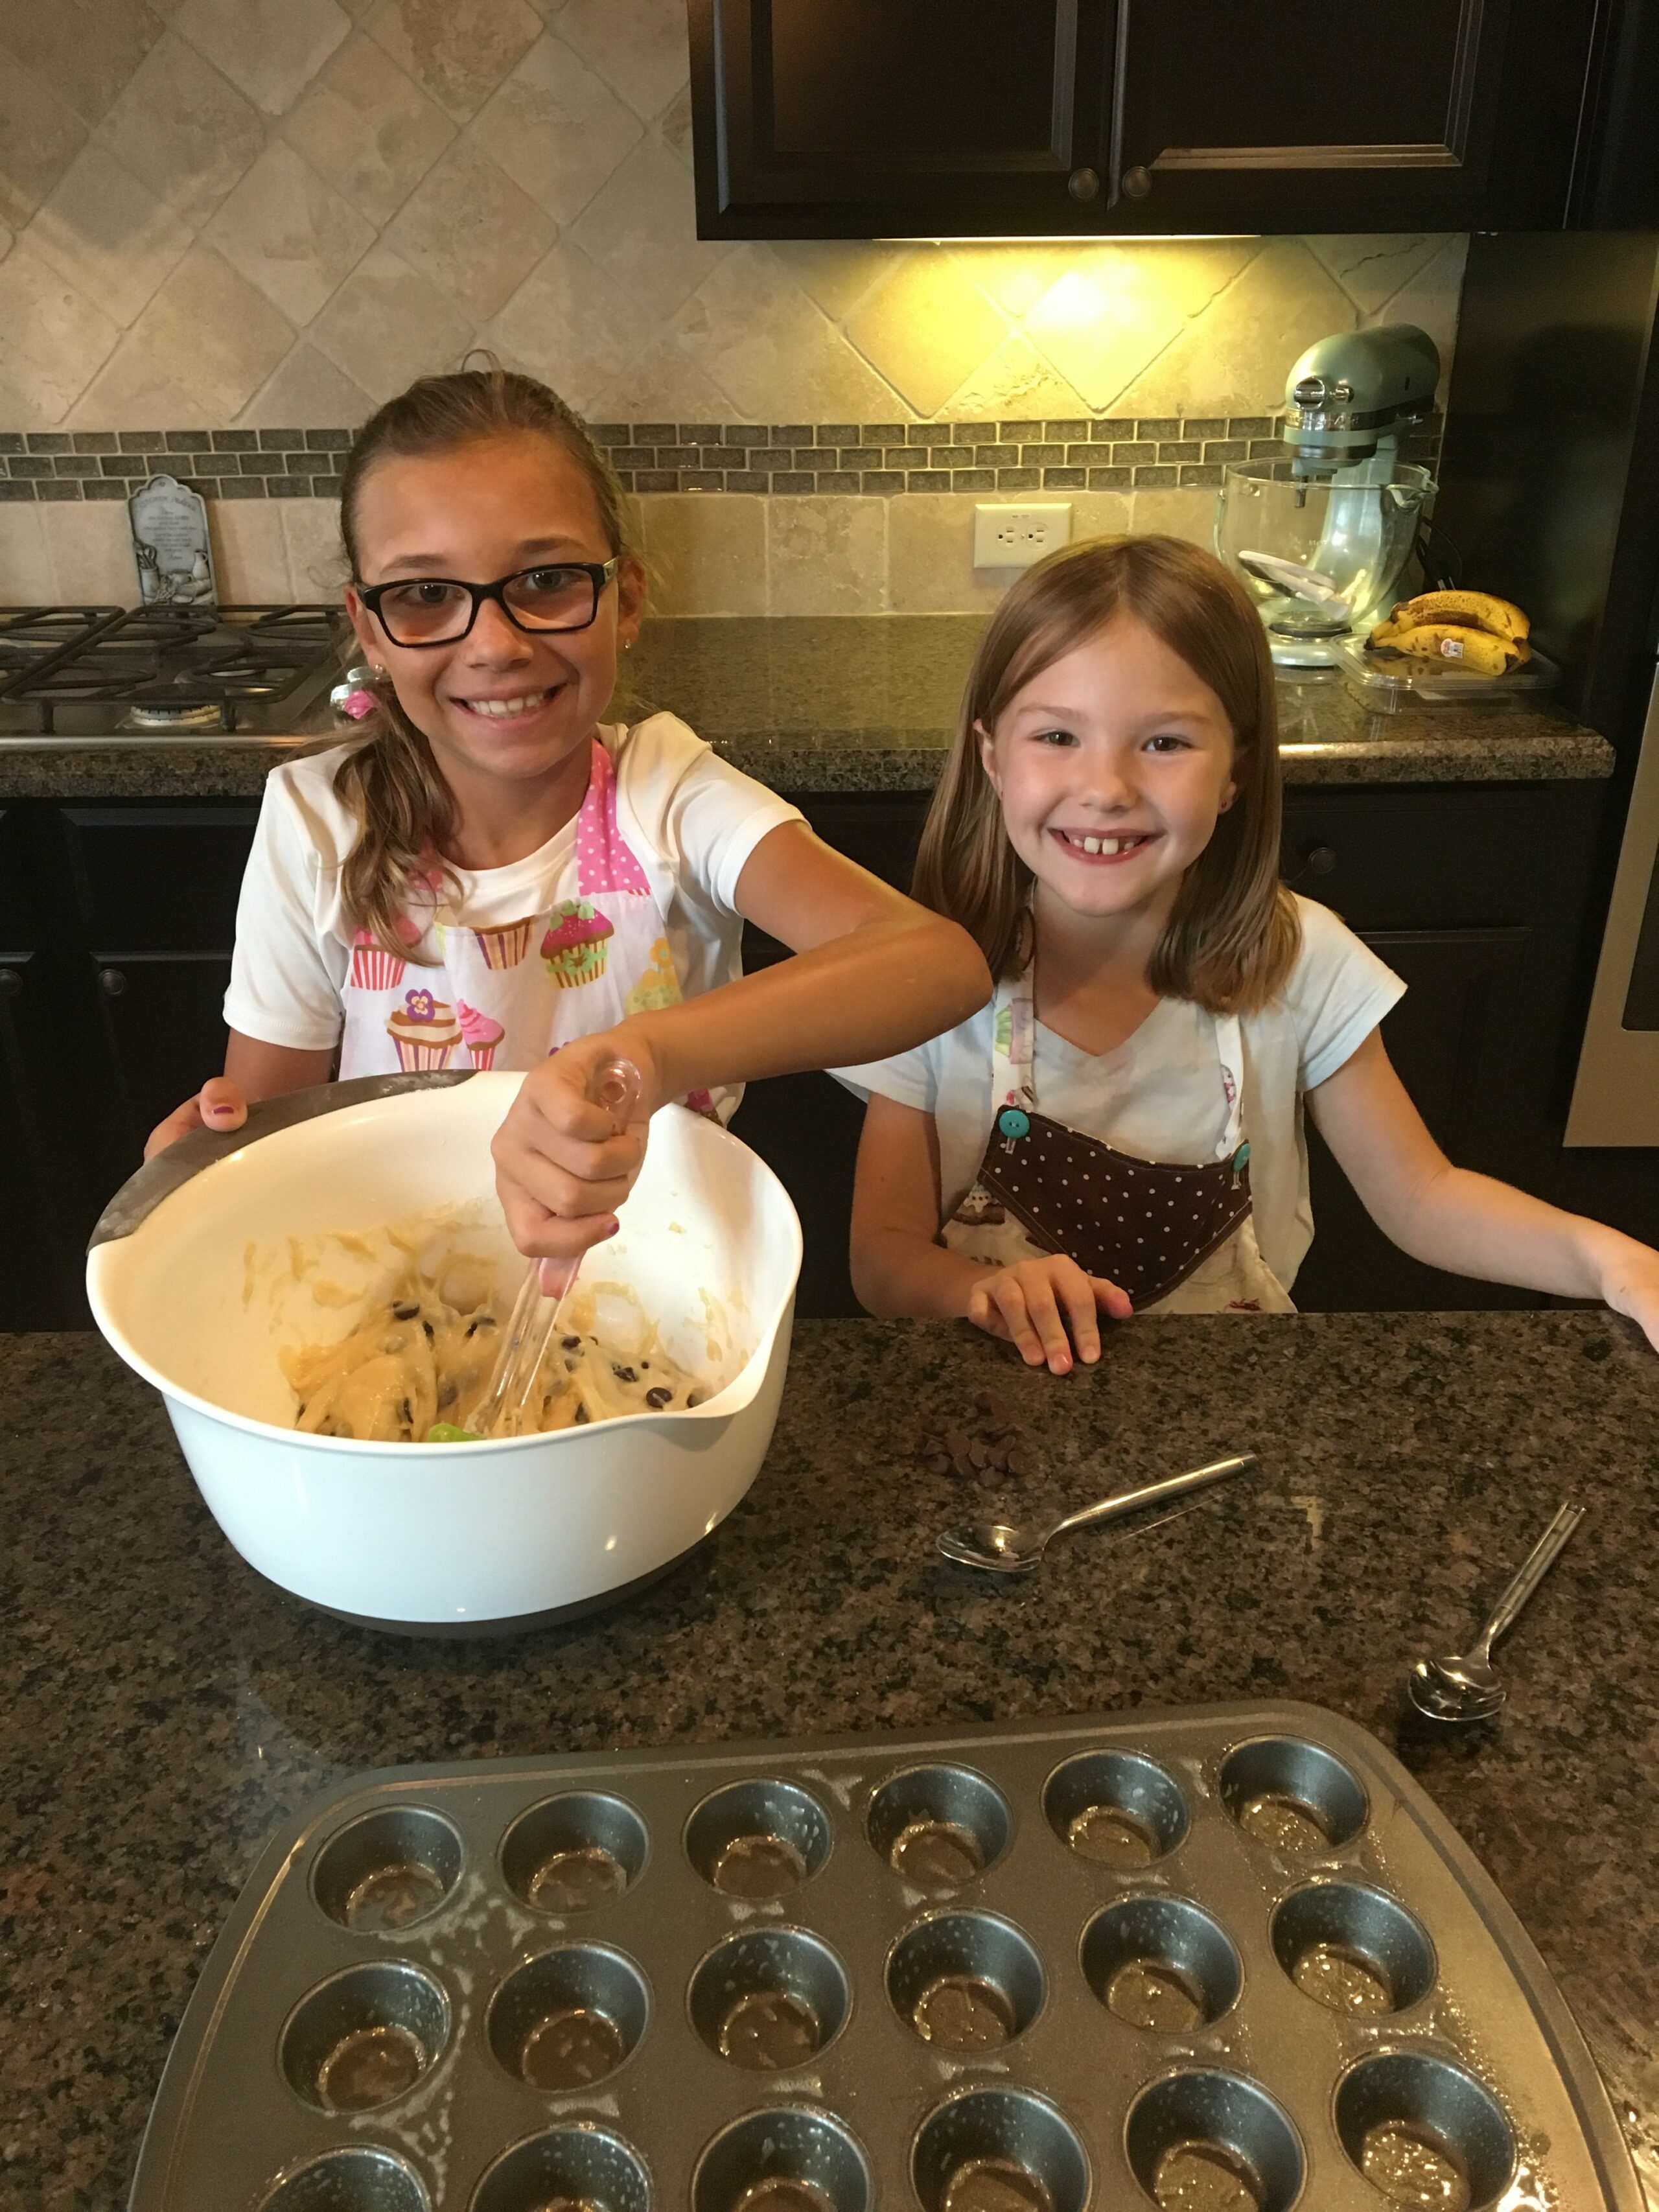 Mini Chocolate Chip Muffins - The Cookin Chicks